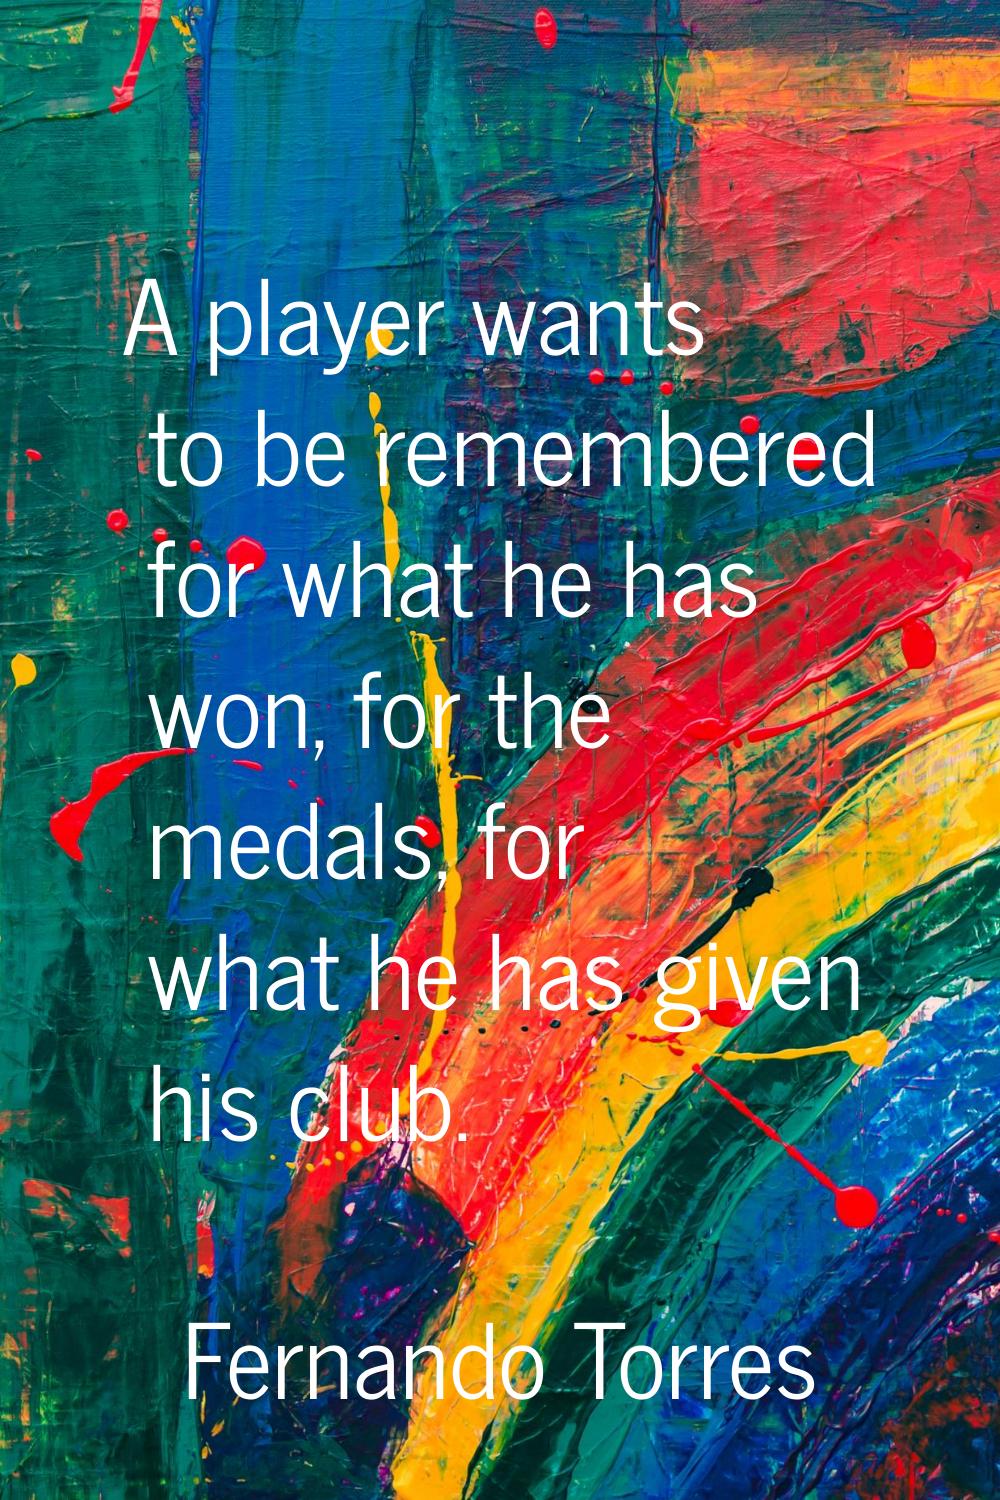 A player wants to be remembered for what he has won, for the medals, for what he has given his club